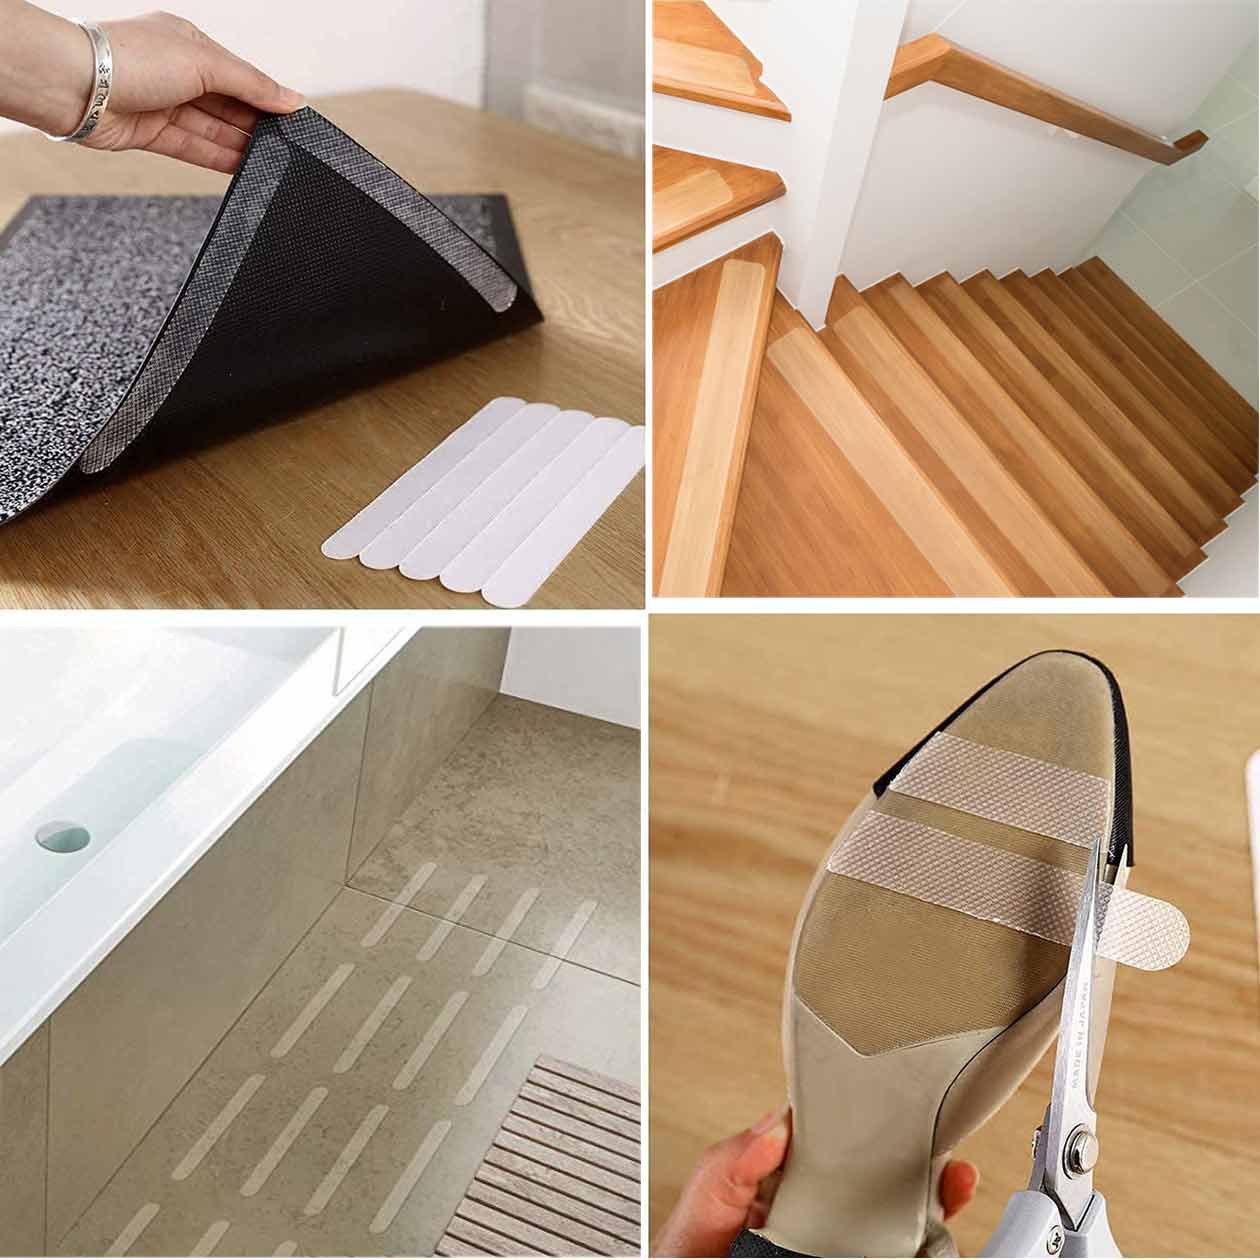 Non-slip tape for stairs